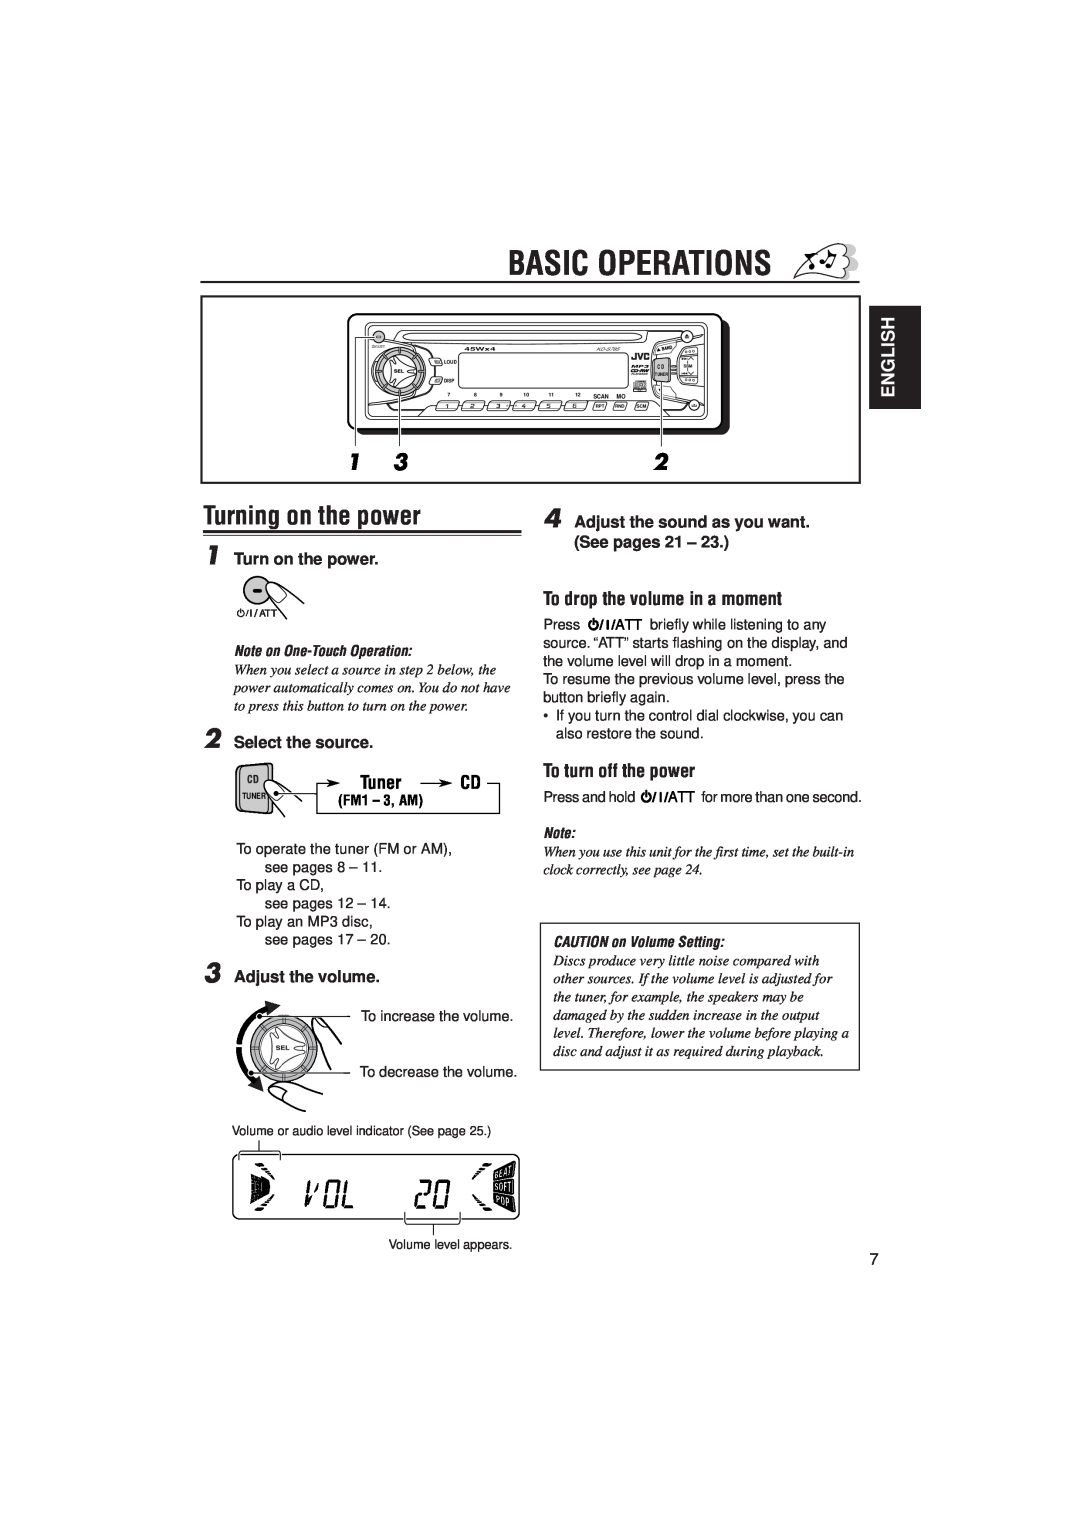 JVC KD-S785 manual Basic Operations, Turning on the power, Tuner CD, To drop the volume in a moment, To turn off the power 